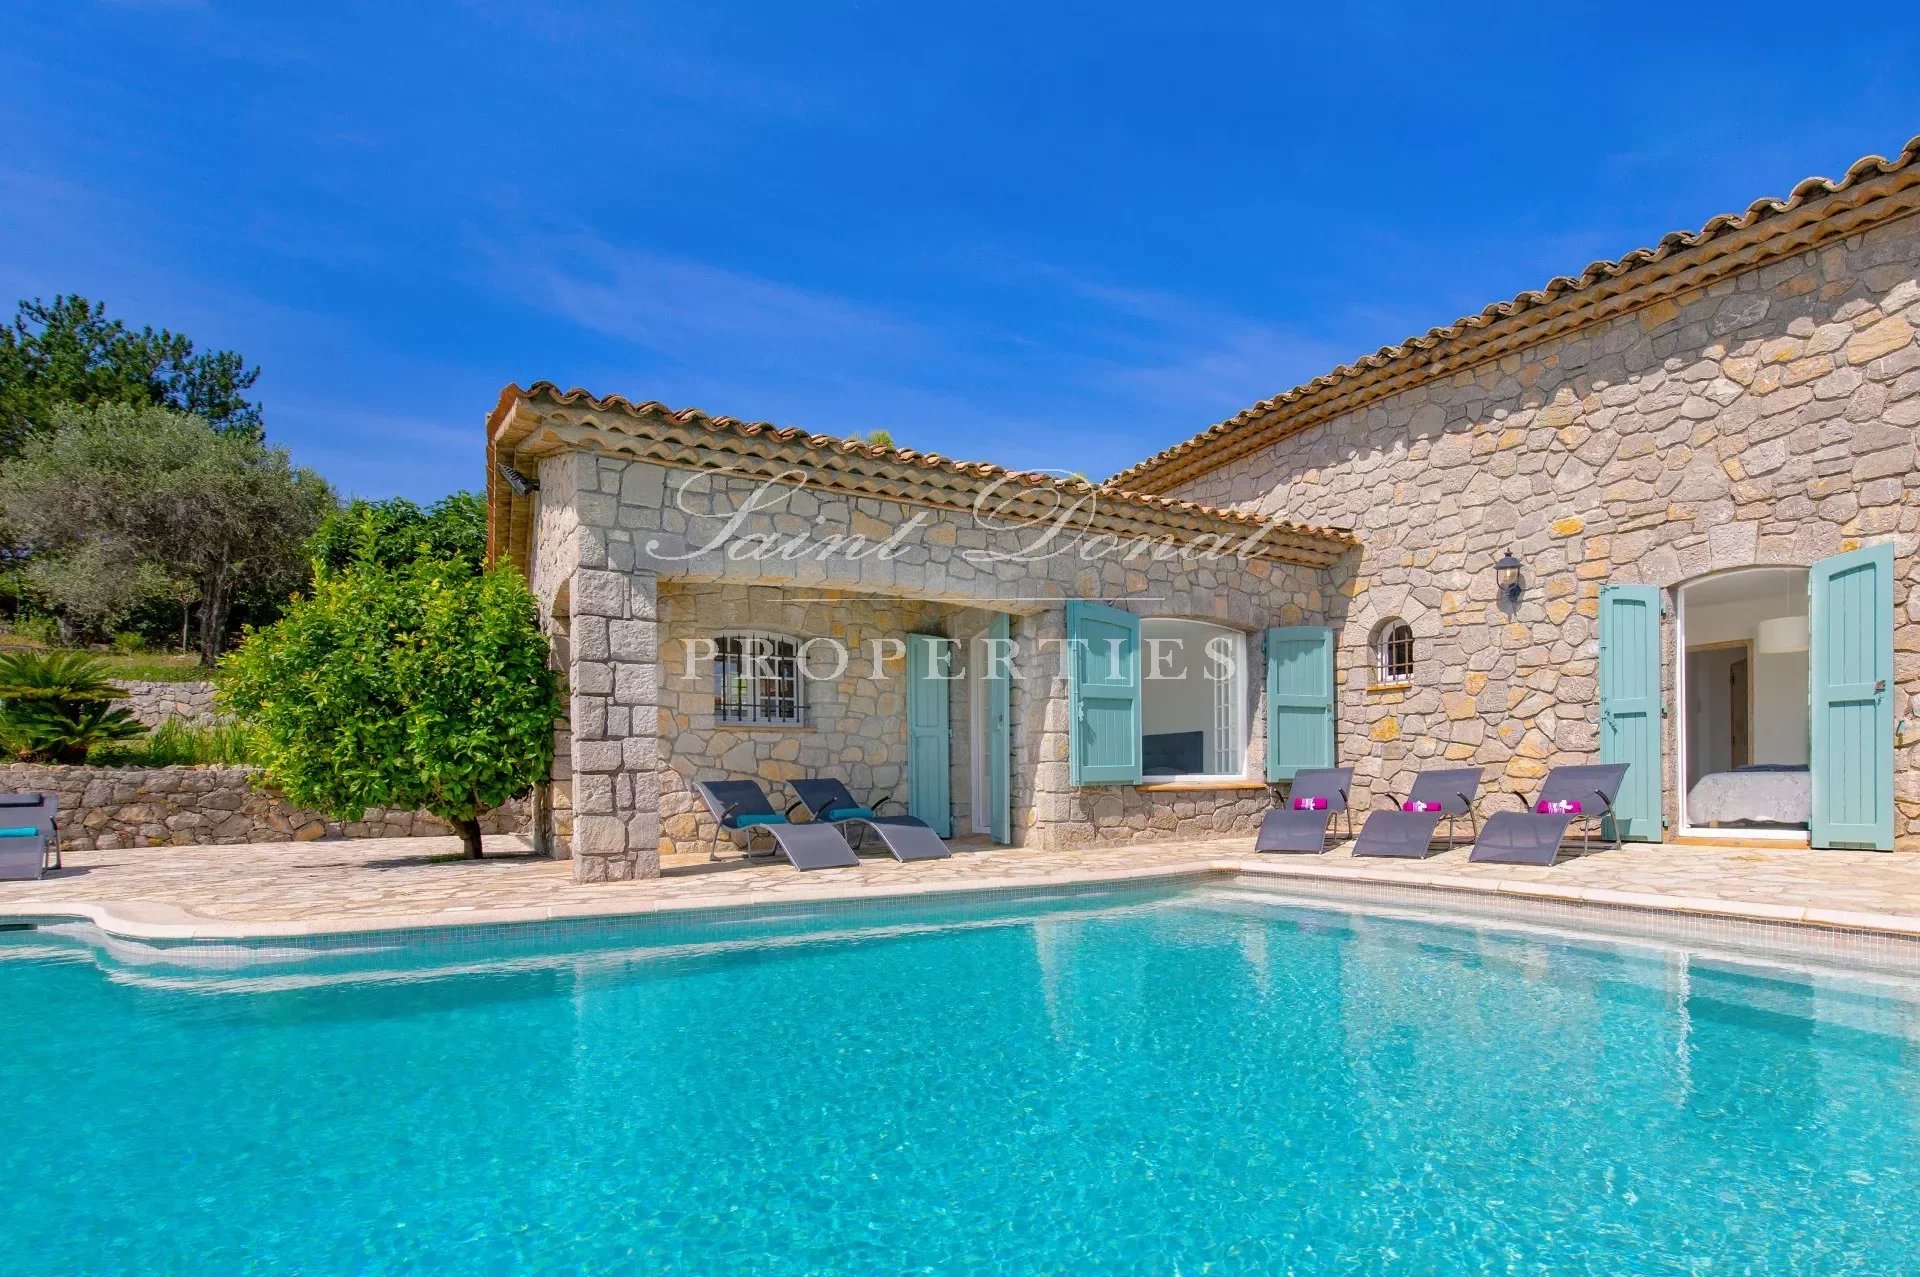 Magnificent renovated single-storey Provencal stonehouse